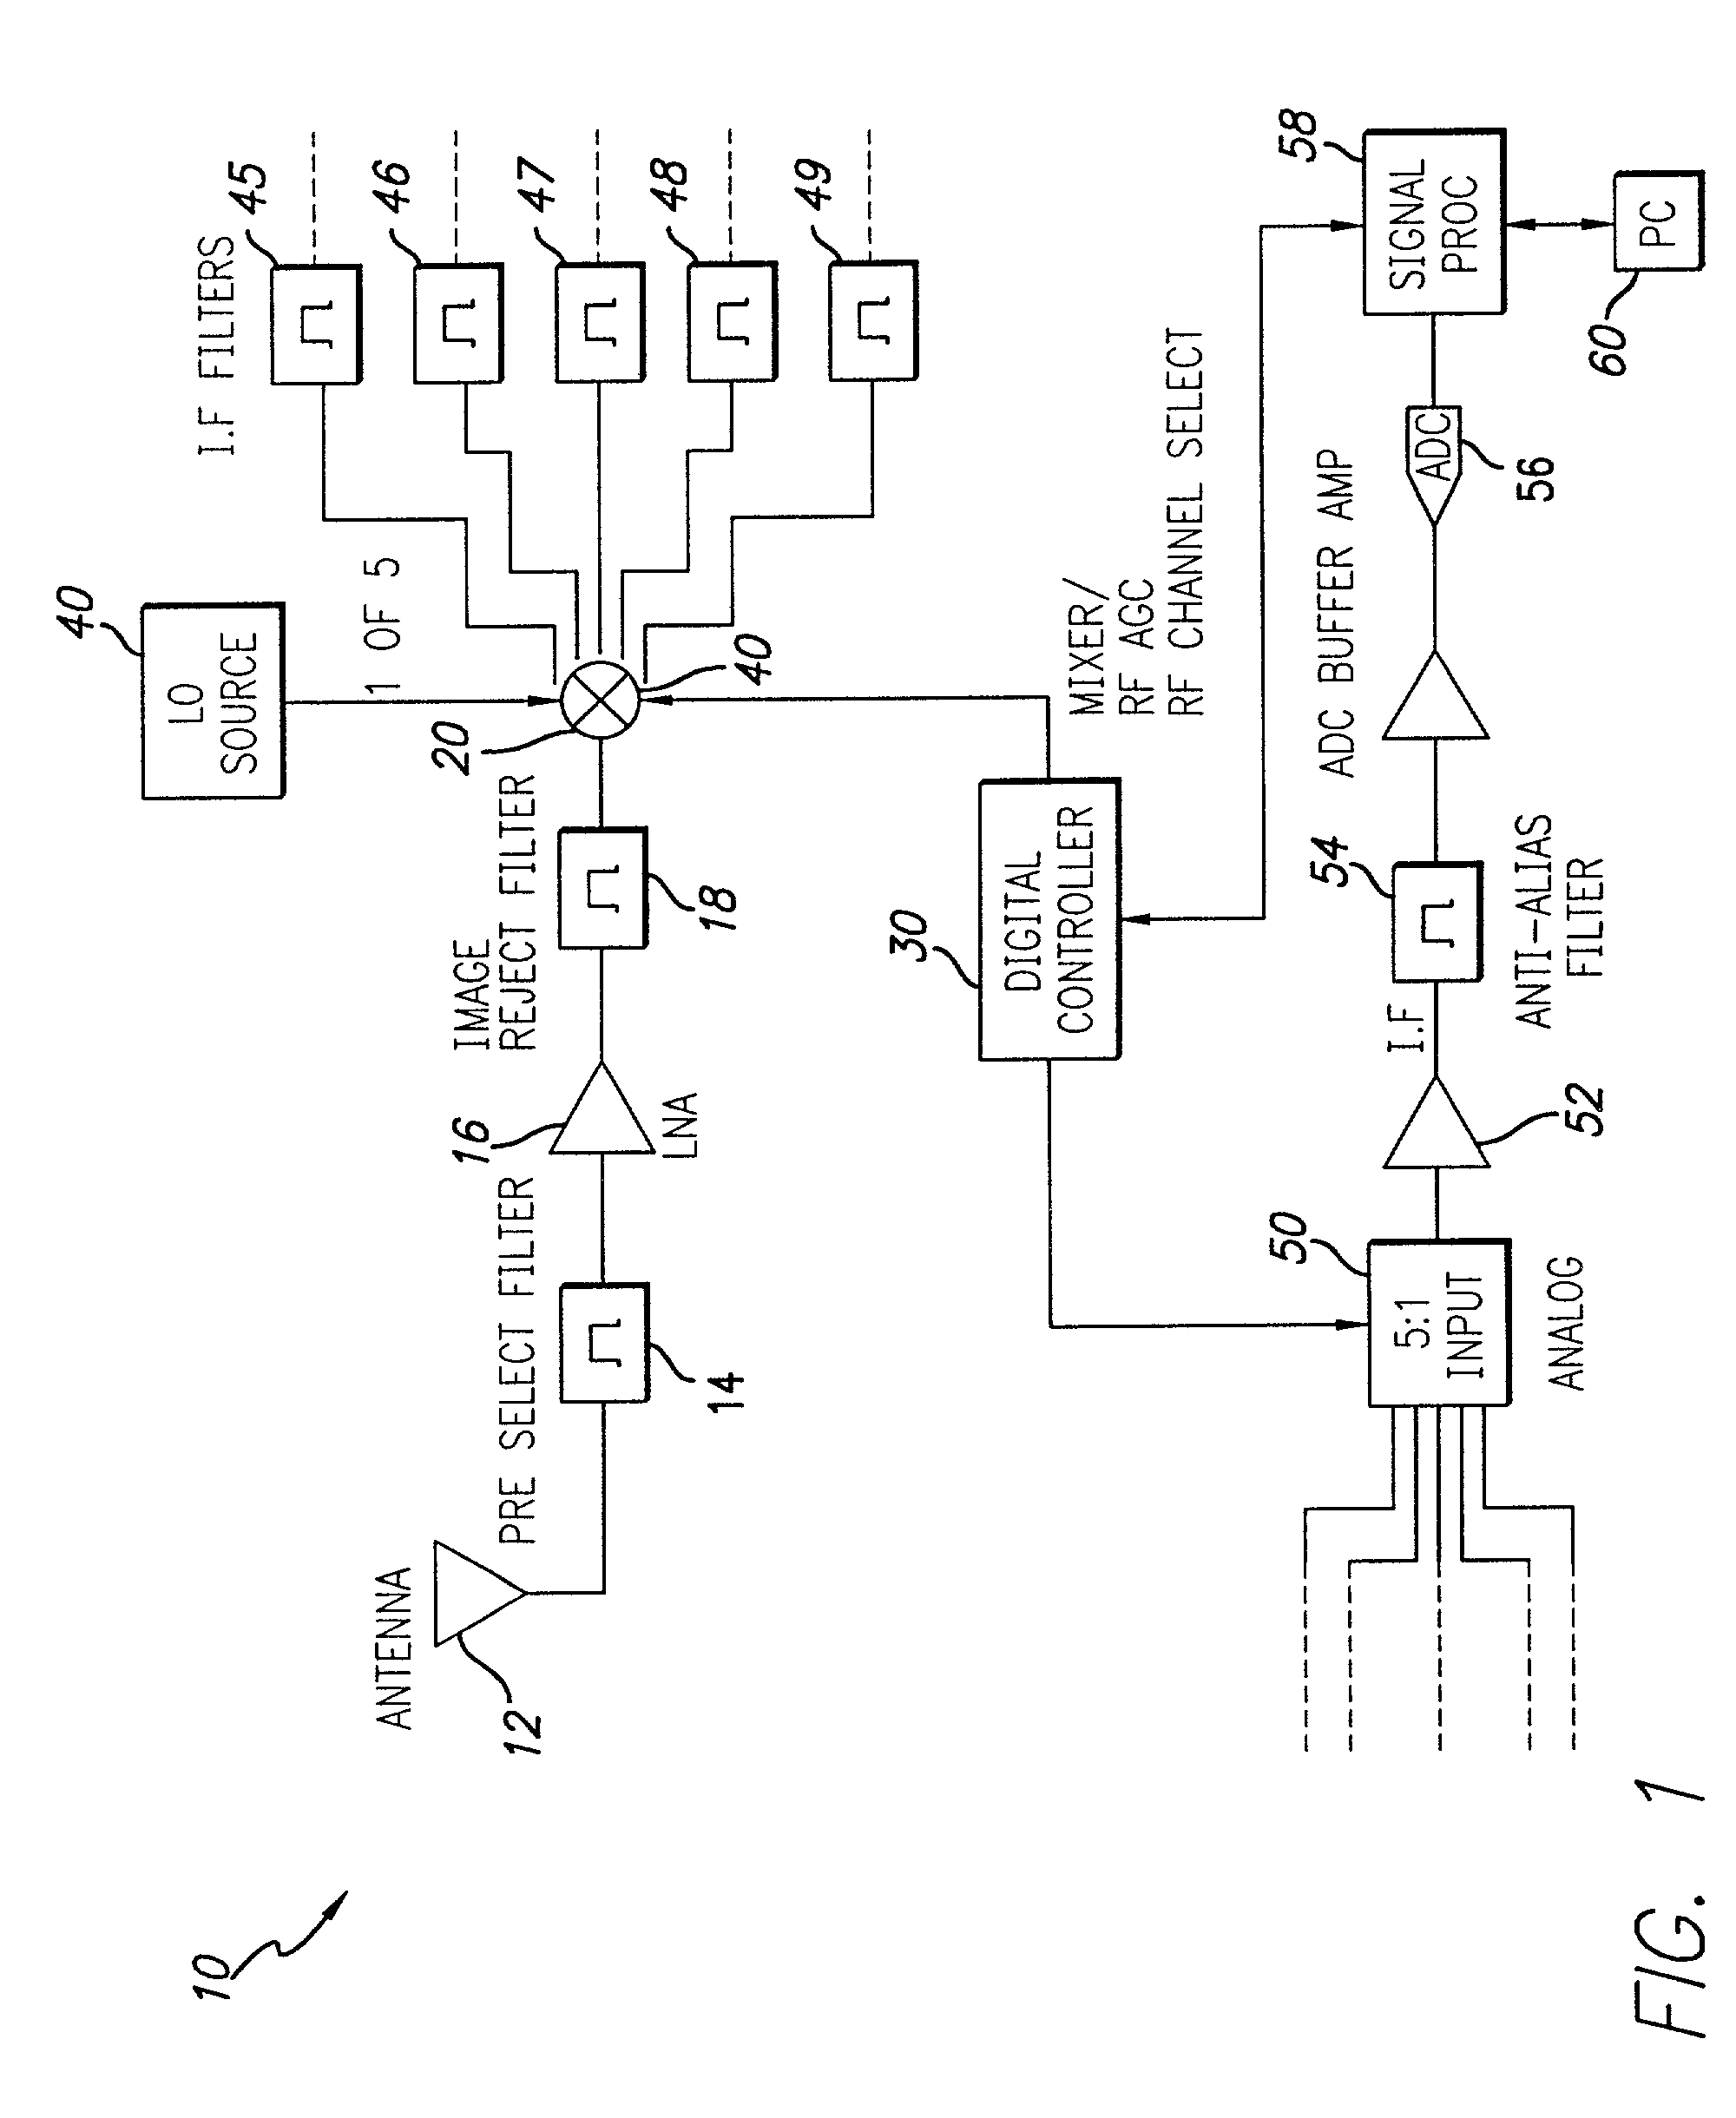 Low noise, low distortion, muxable Gilbert mixer signal processing system and method with AGC functionality